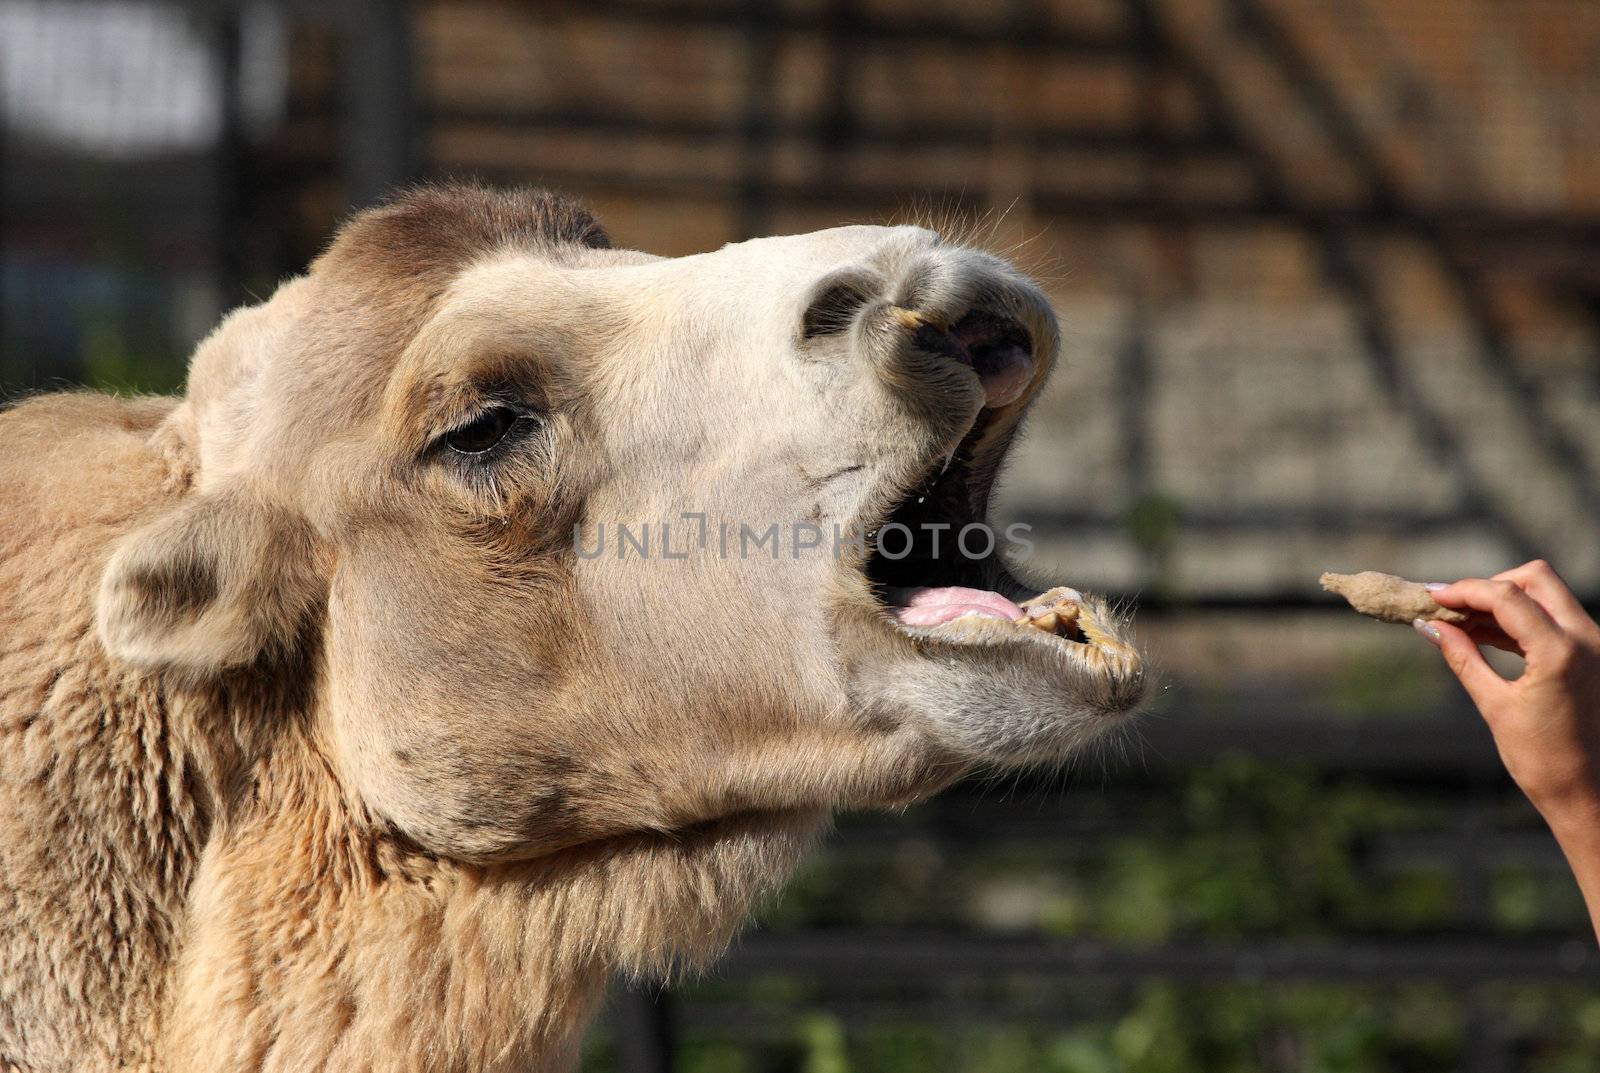 camel, mouth, eats, hand, animal